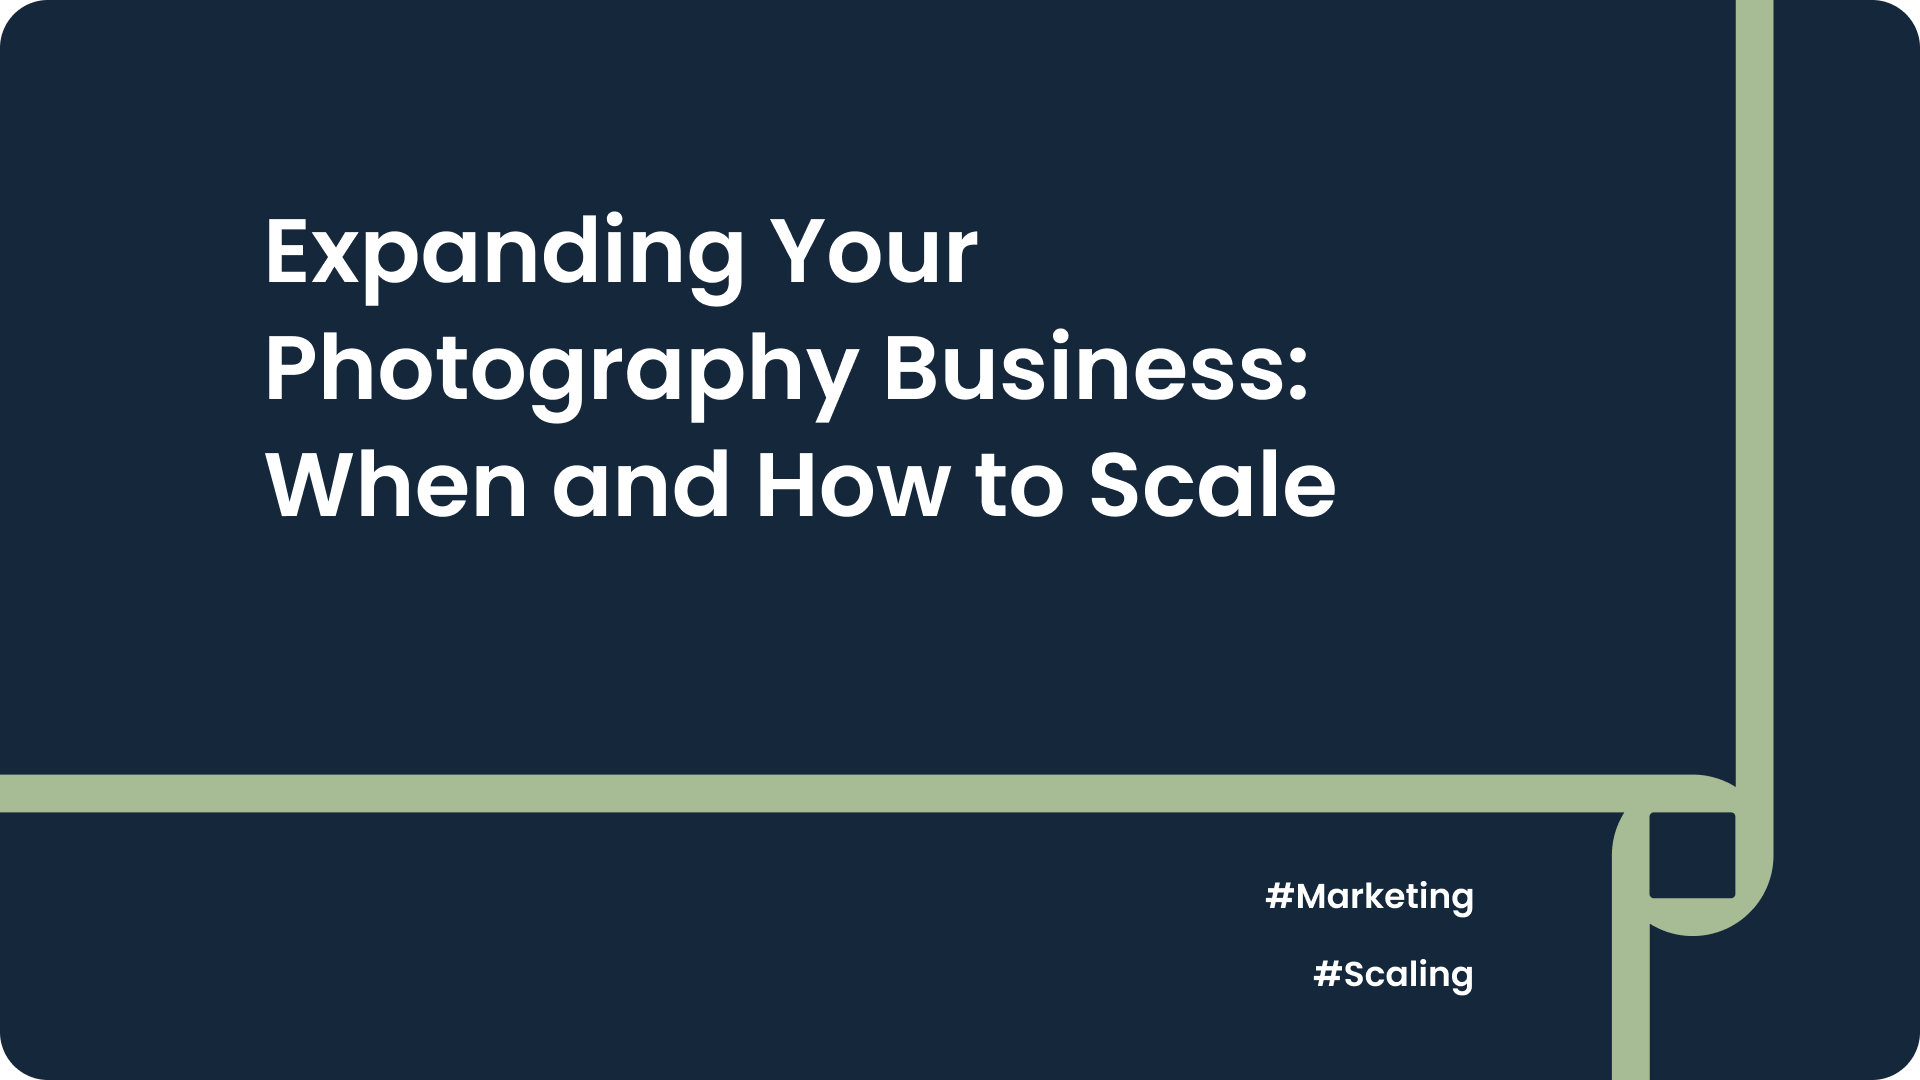 Expanding Your Photography Business: When and How to Scale